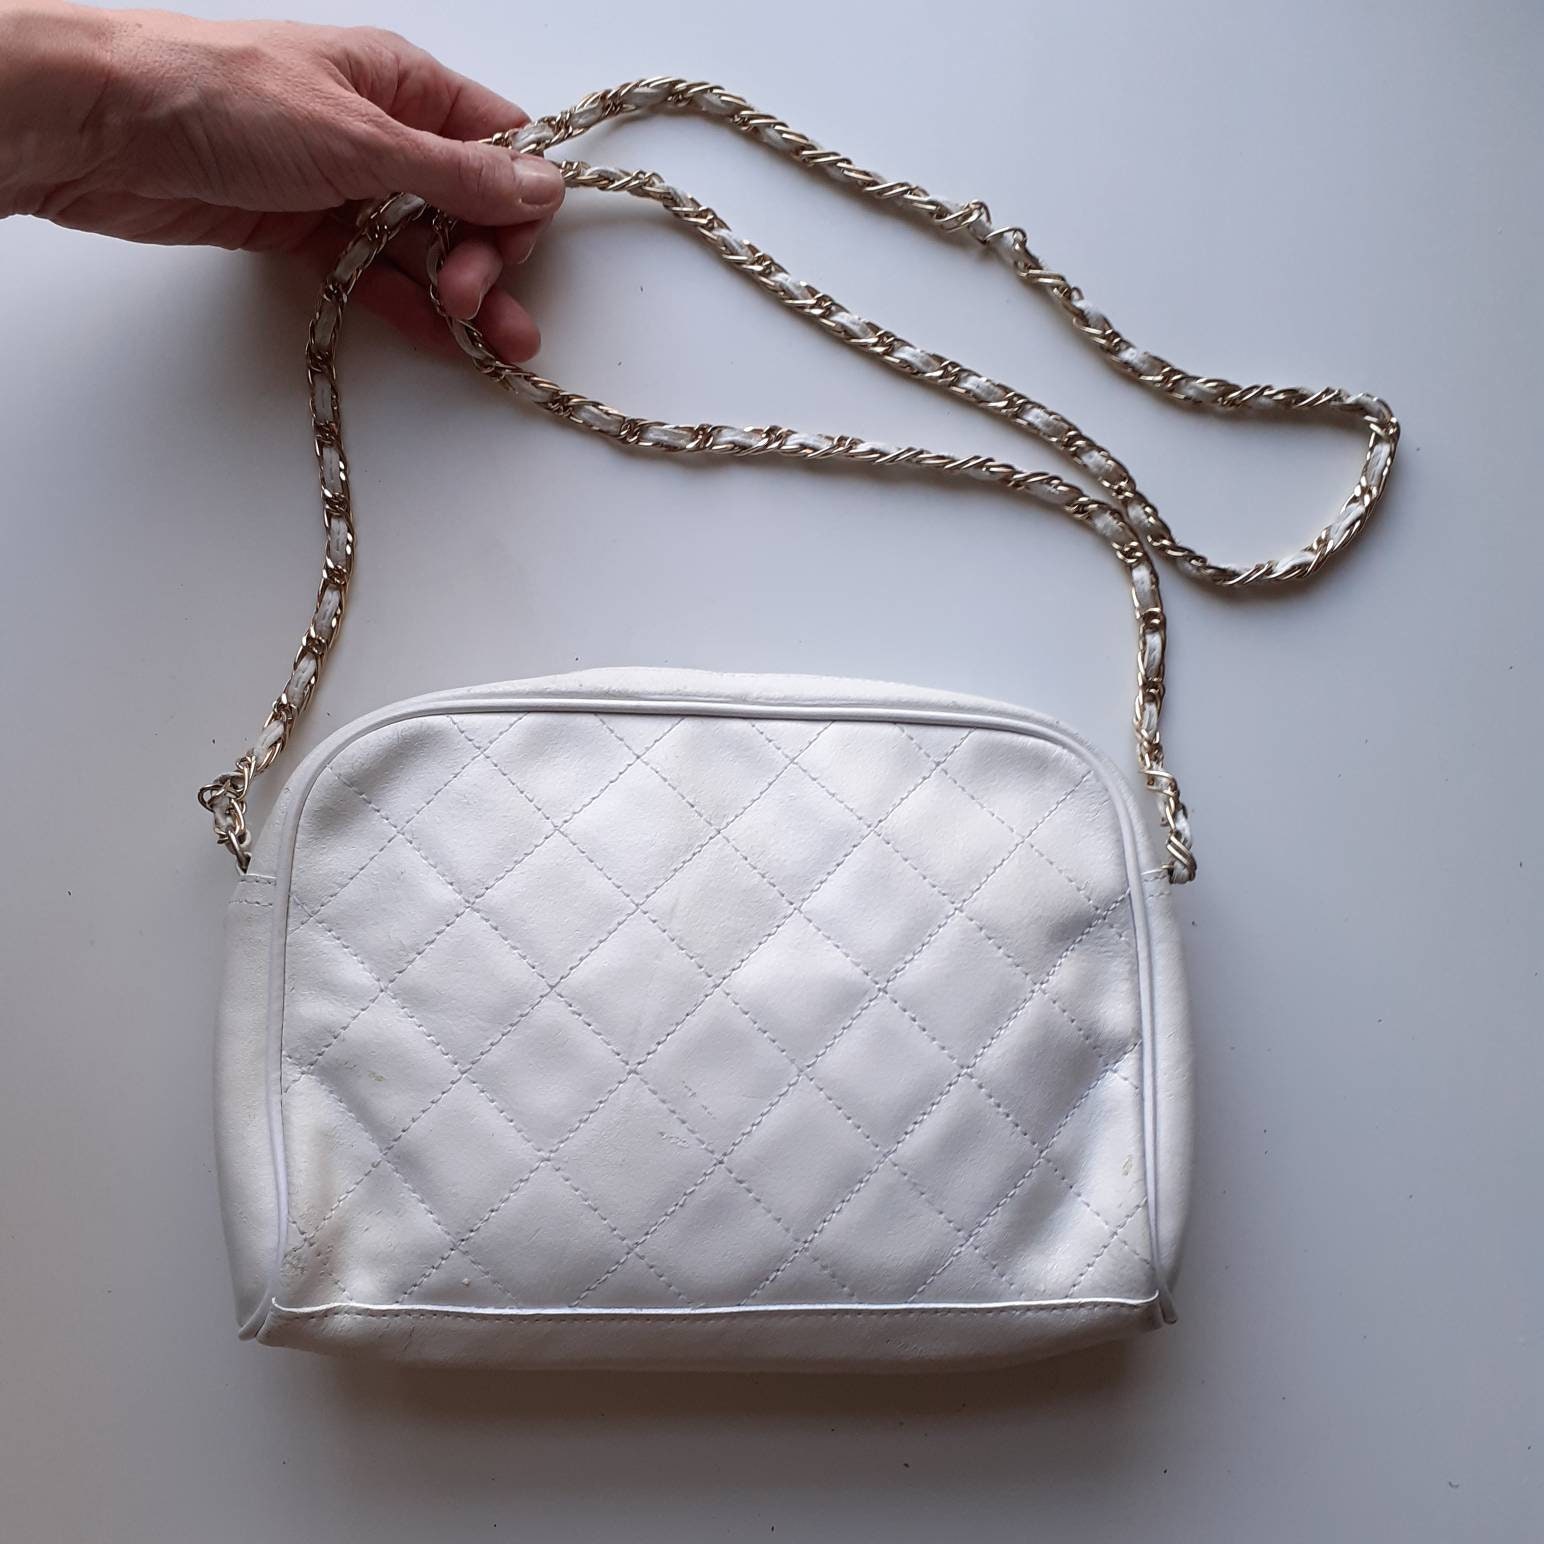 Quilted Shoulderbag White Leather Handbag Gold Chain Bag Ladies Cross Body Vintage 1980s St Michael Day Bag